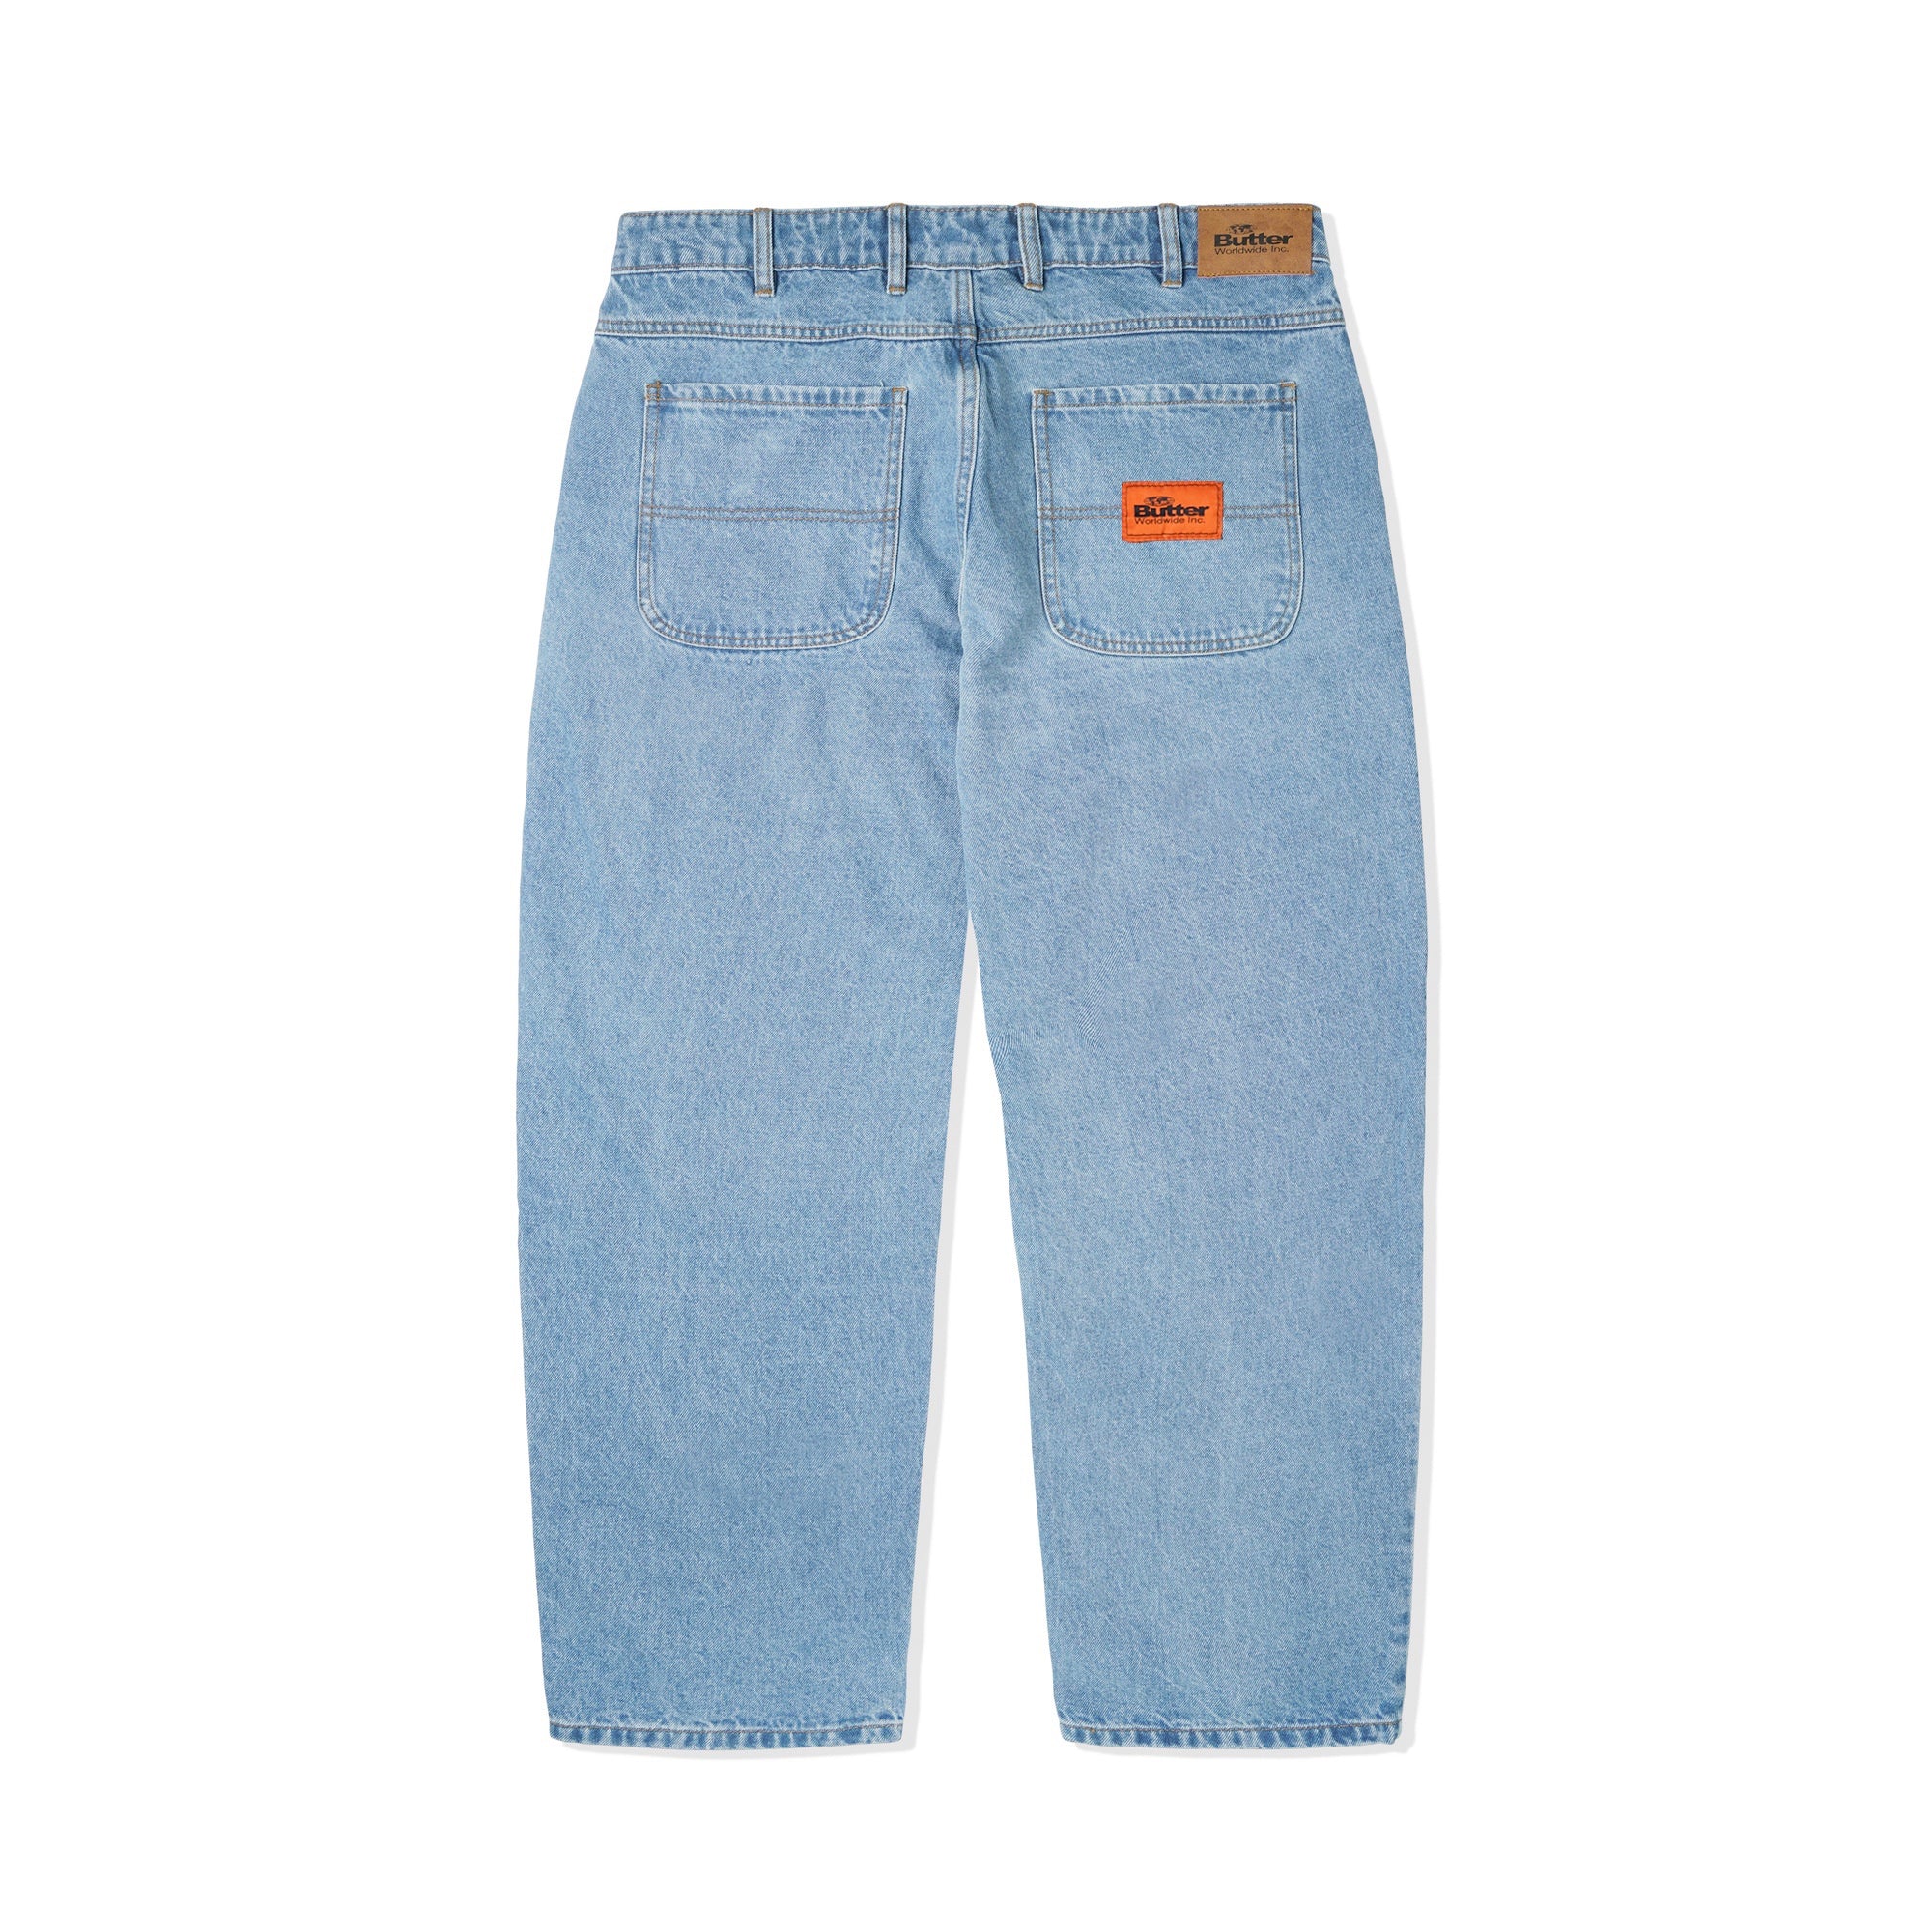 Butter Santosuosso Denim Pants Washed Blue Q223 - Orchard